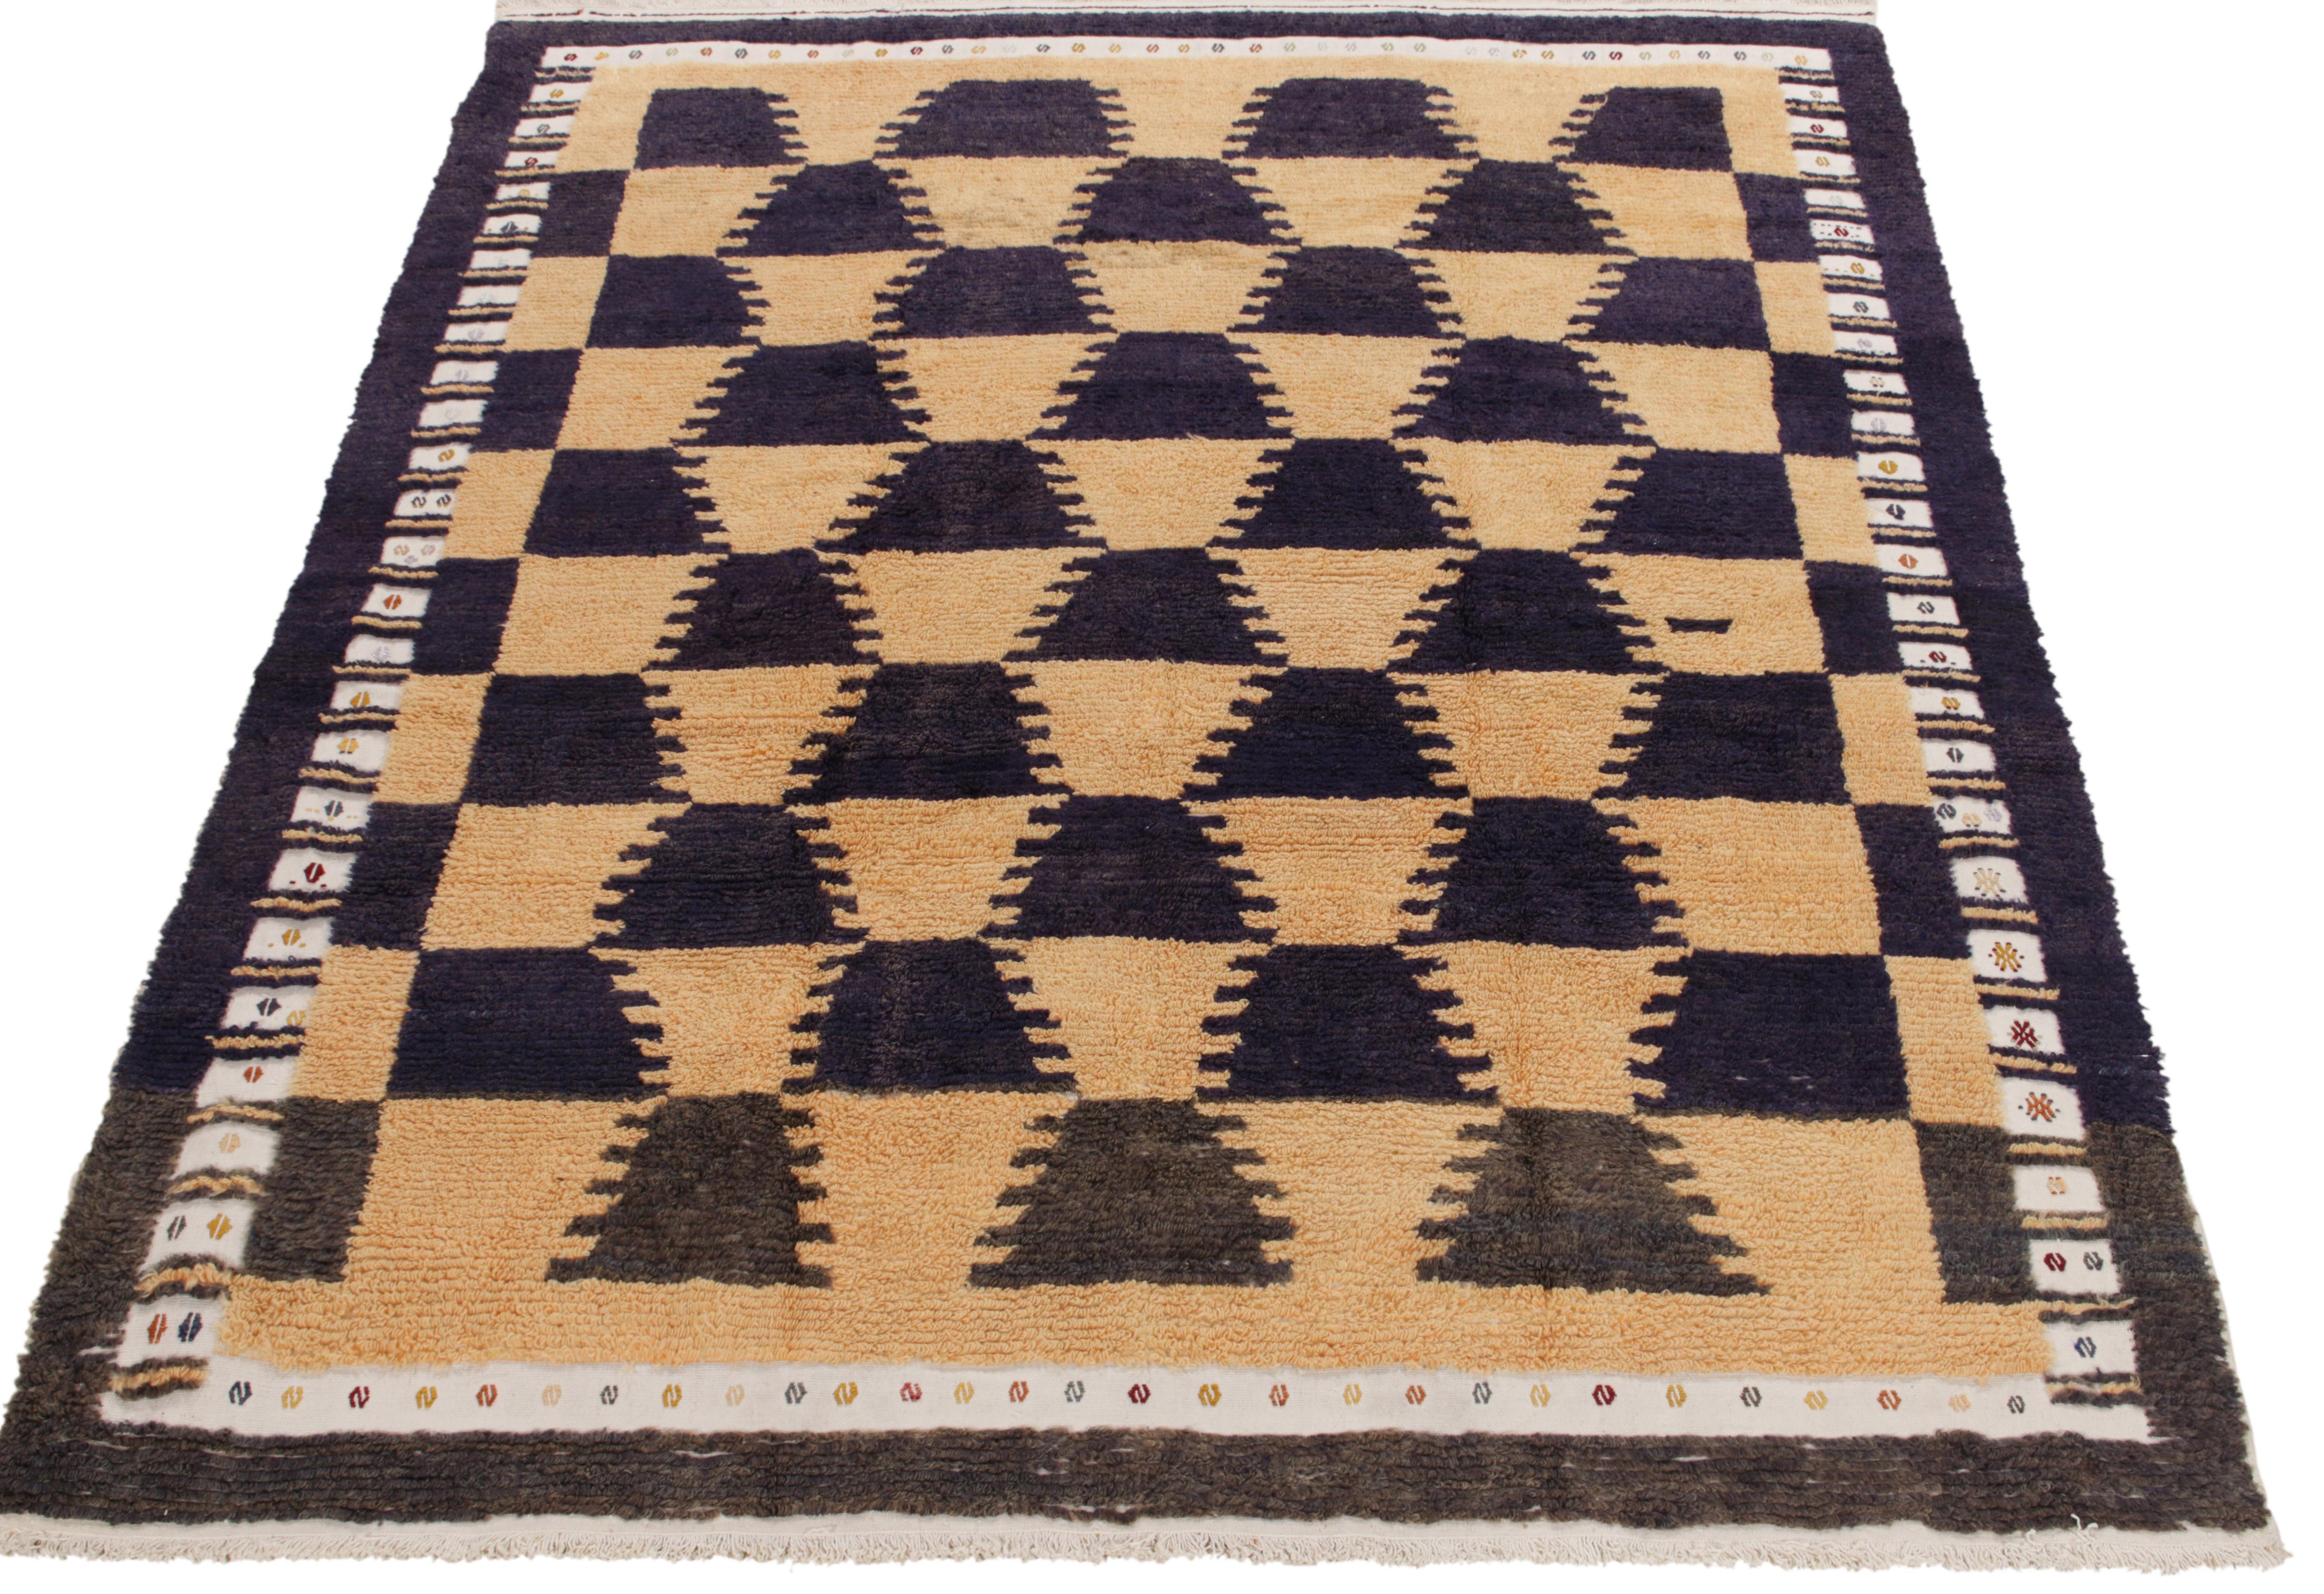 A spectacle of fine craftsmanship, this Tulu rug of the 1950s from our antique & vintage collection unveils sharp geometry in tribal designs bracing beige, midnight blue & grisailles black tones. Connoisseurs may observe a delicate white border